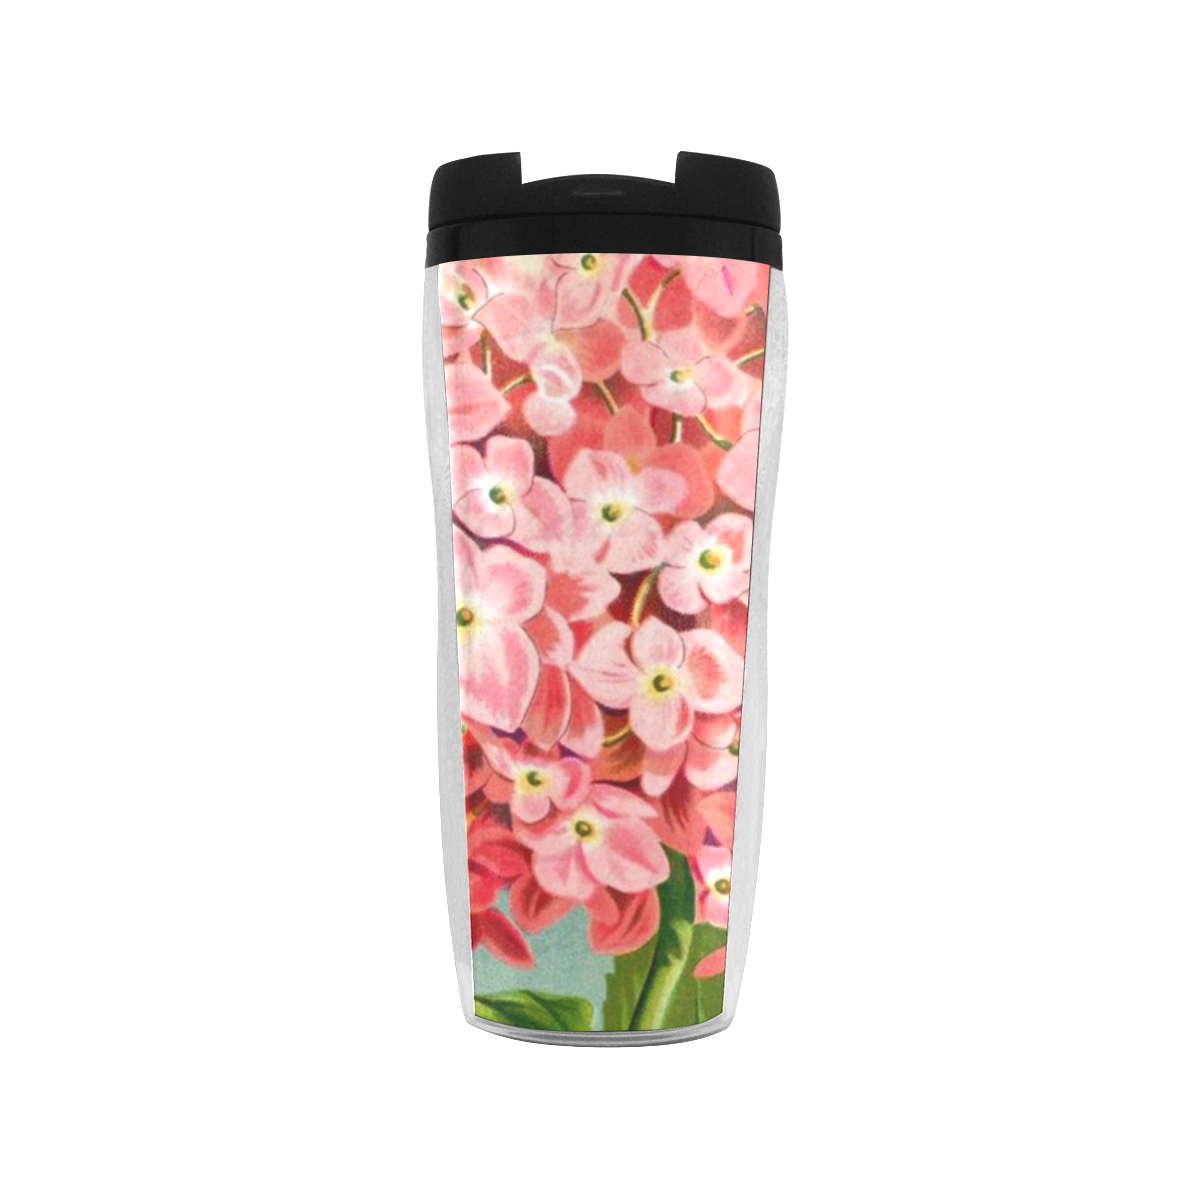 pink hydrangia Reusable Coffee Cup (11.8oz)